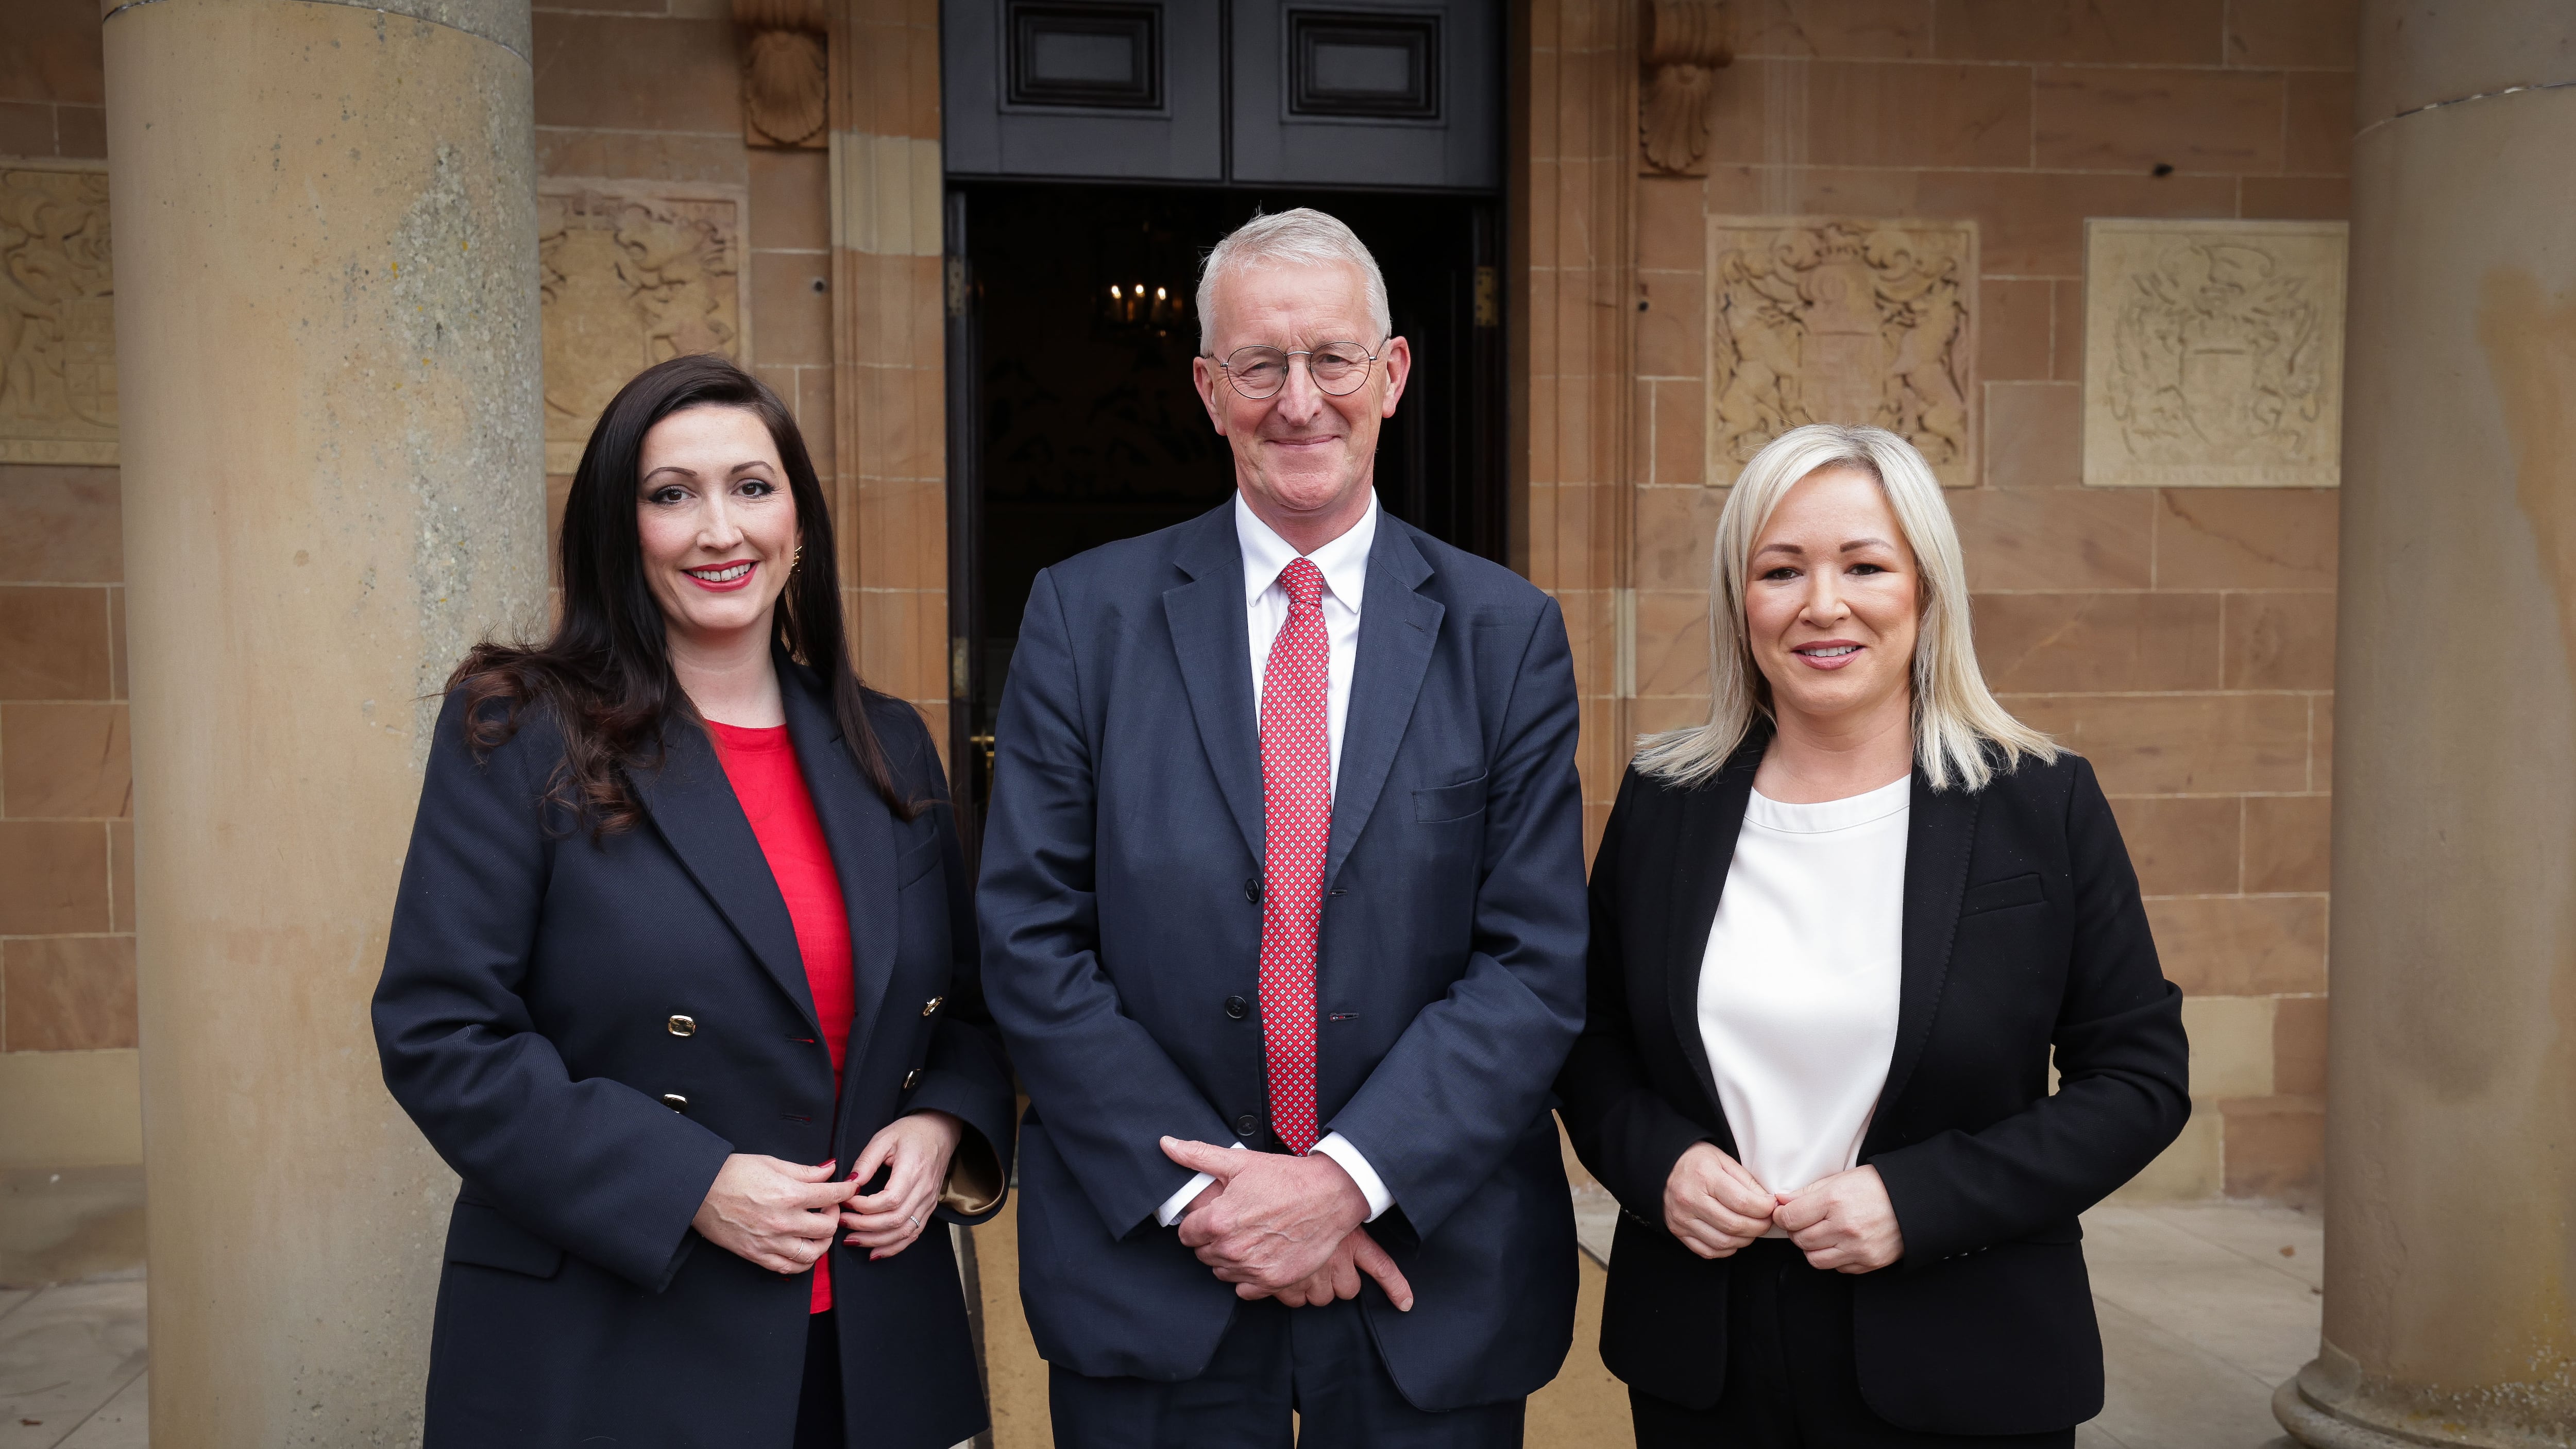 The new Secretary of State for Northern Ireland, Hilary Benn MP, is pictured meeting First Minister Michelle O’Neill and deputy First Minister Emma Little-Pengelly at Hillsborough Caste on Saturday evening Photo by Kelvin Boyes / Press Eye.